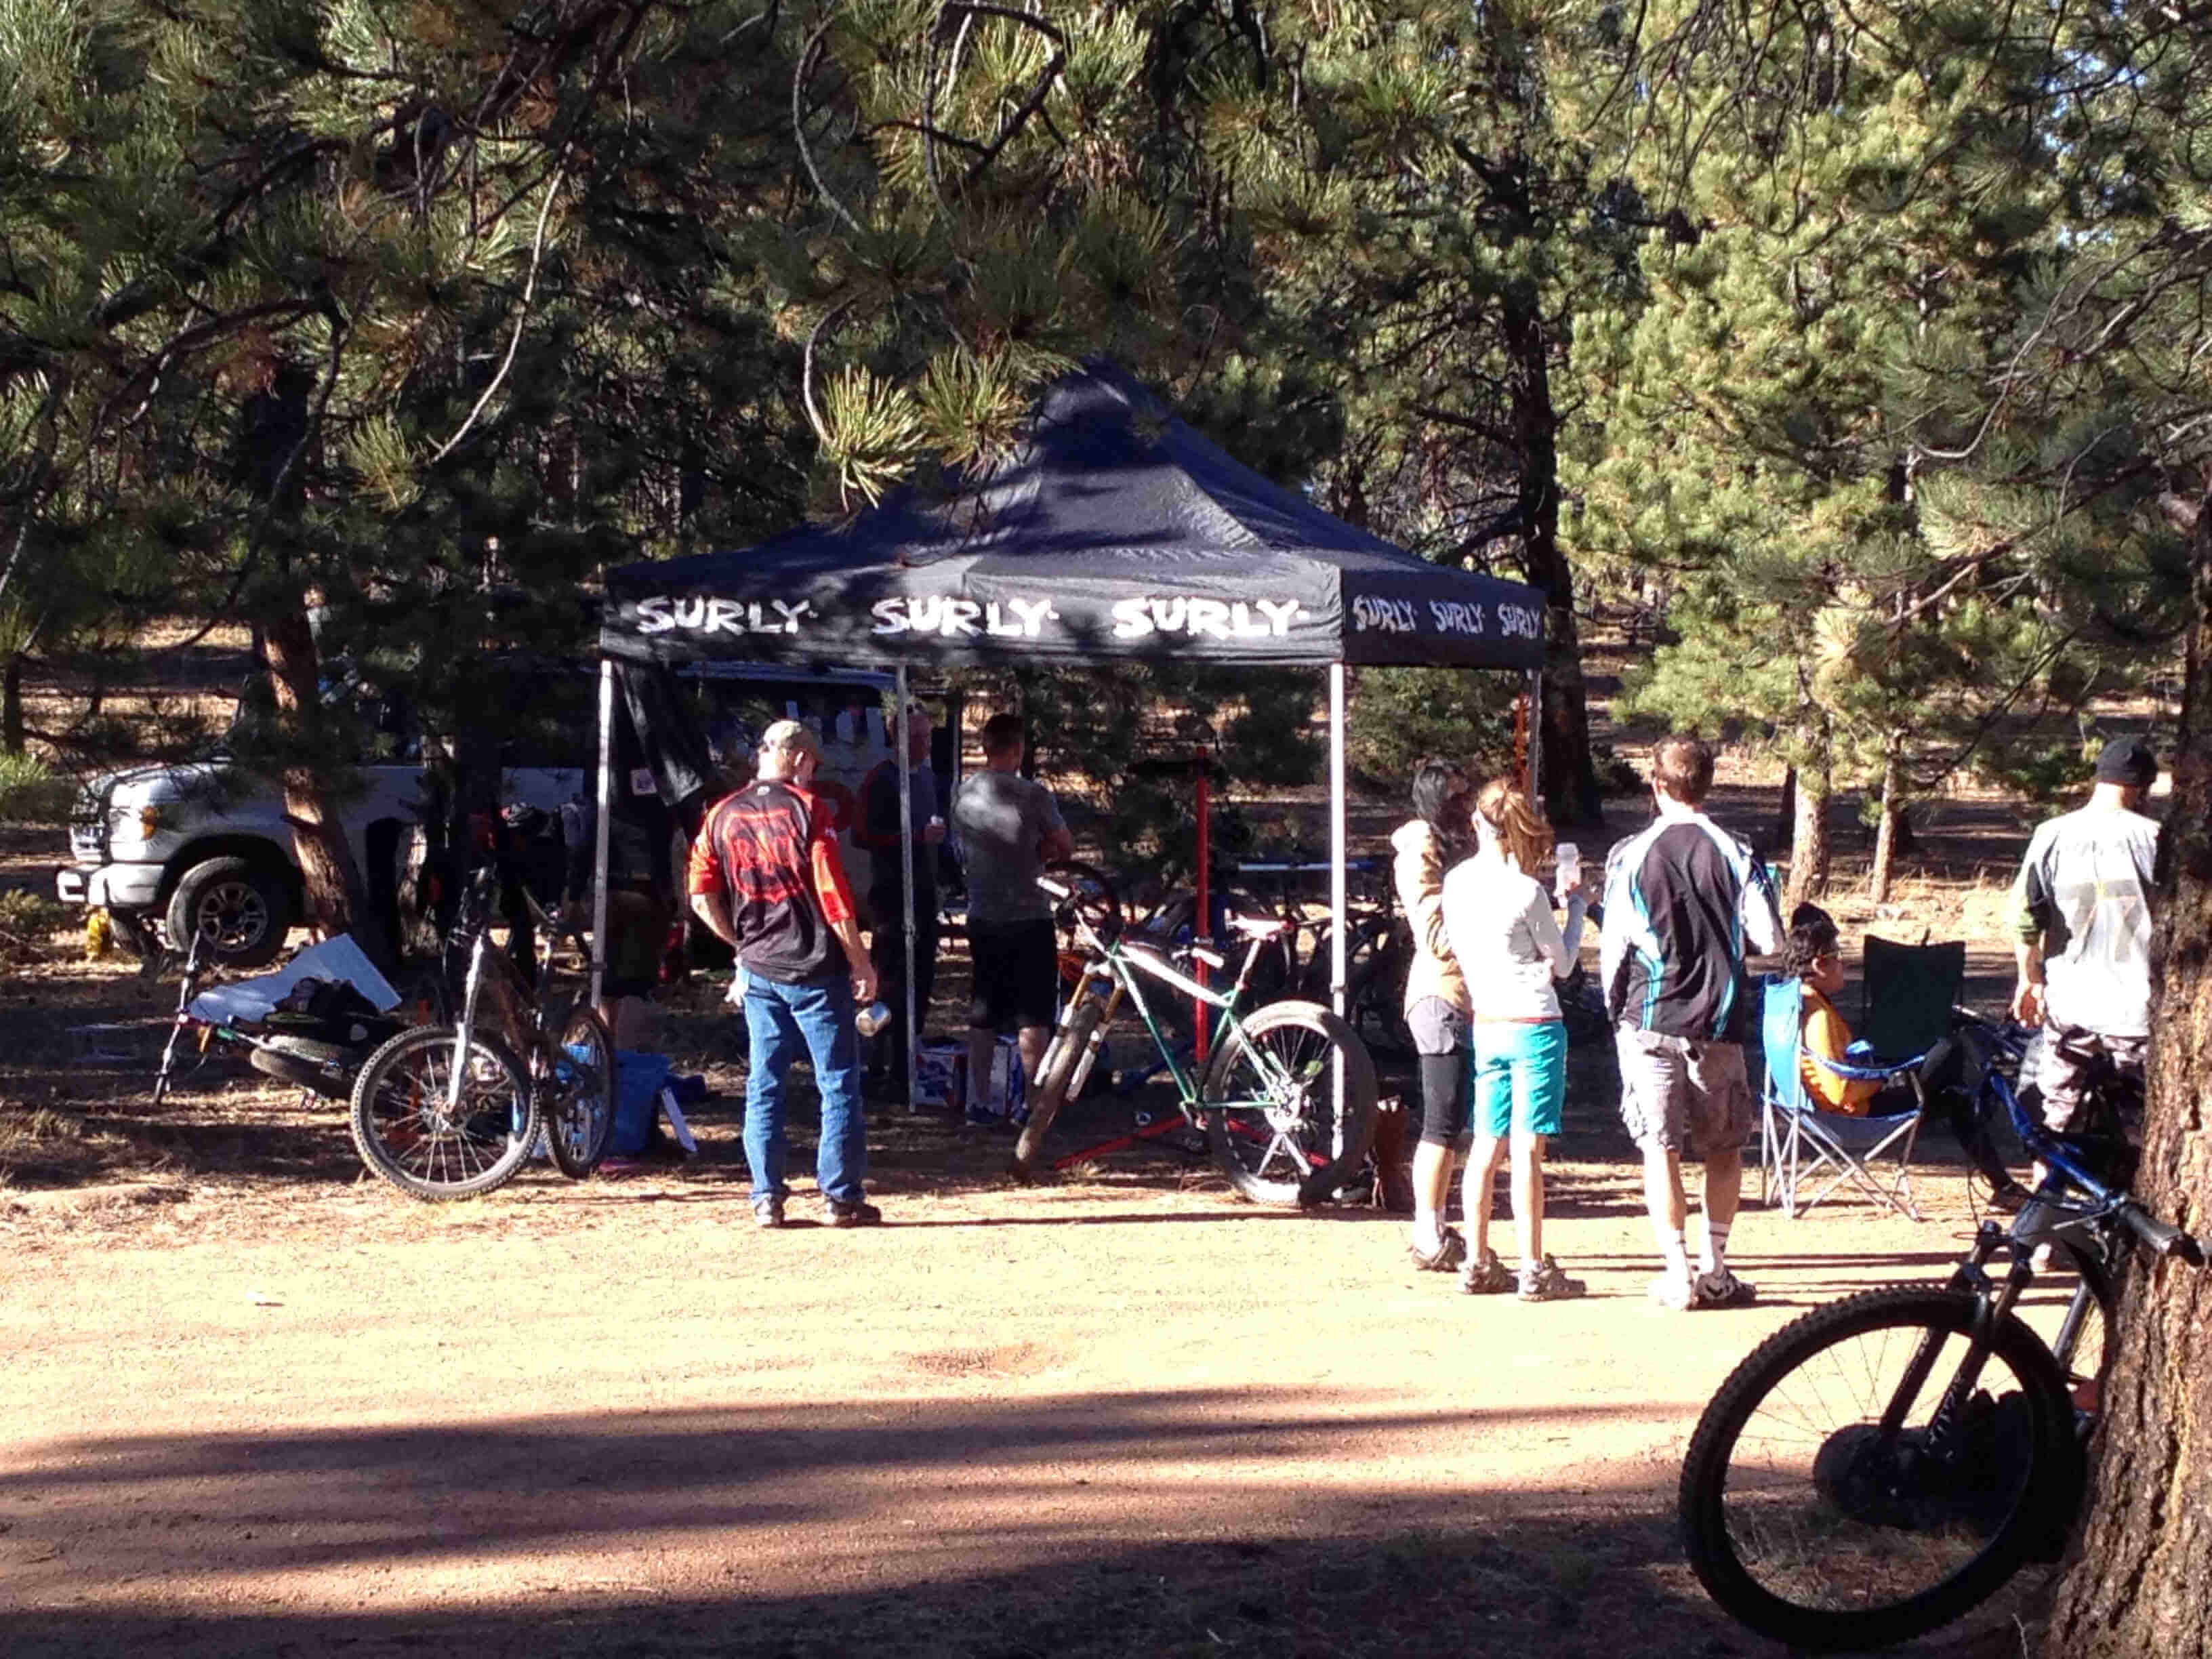 Rear view of people standing in front of a Surly Bikes canopy, with bikes parked around, on a clearing in a forest